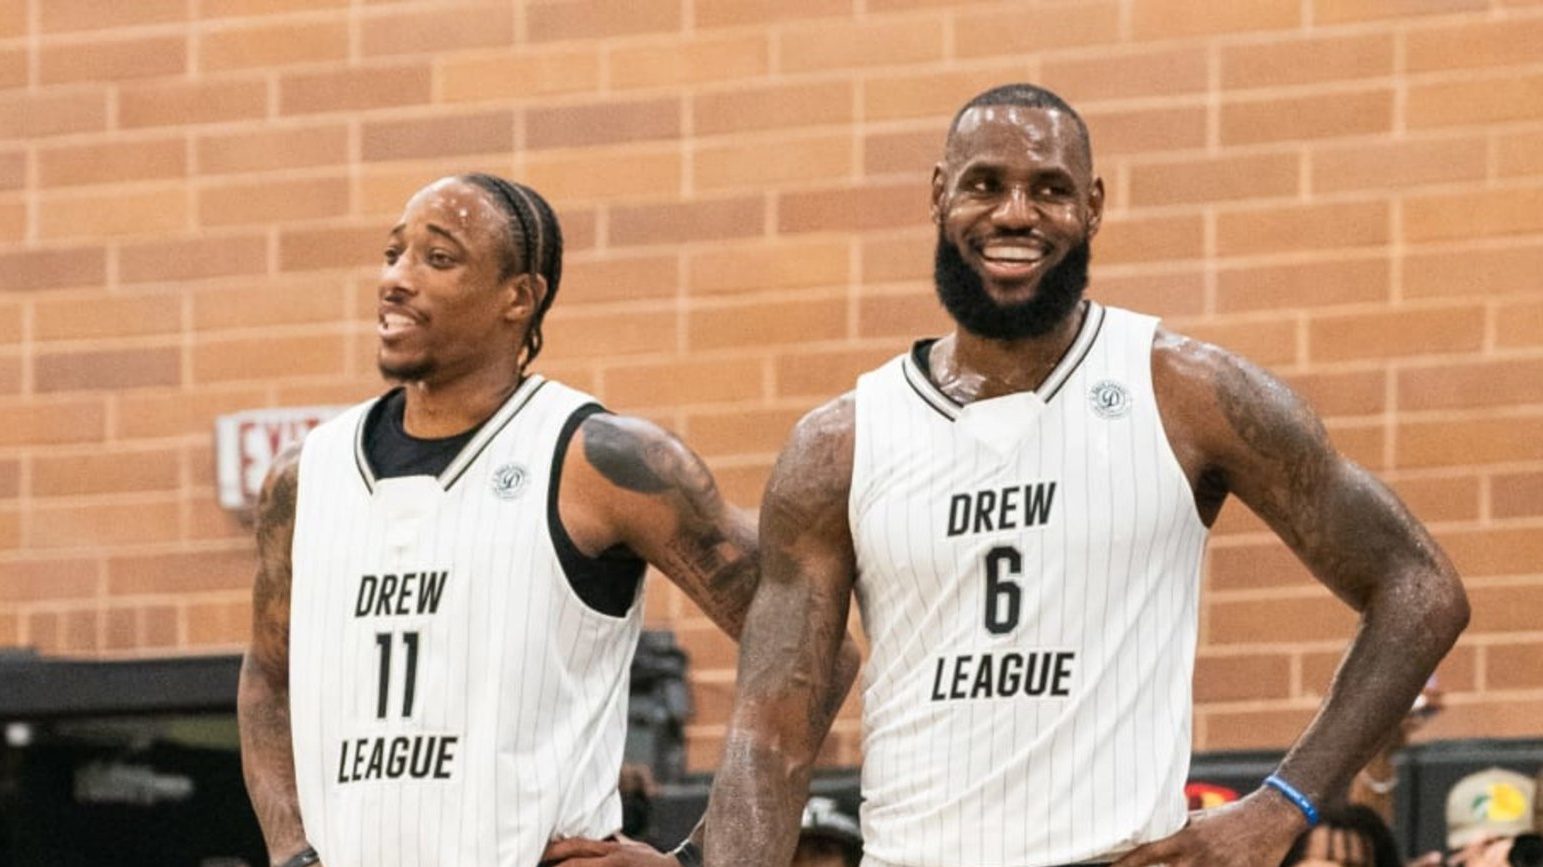 DeMar DeRozan explains why he loves playing in the Drew League